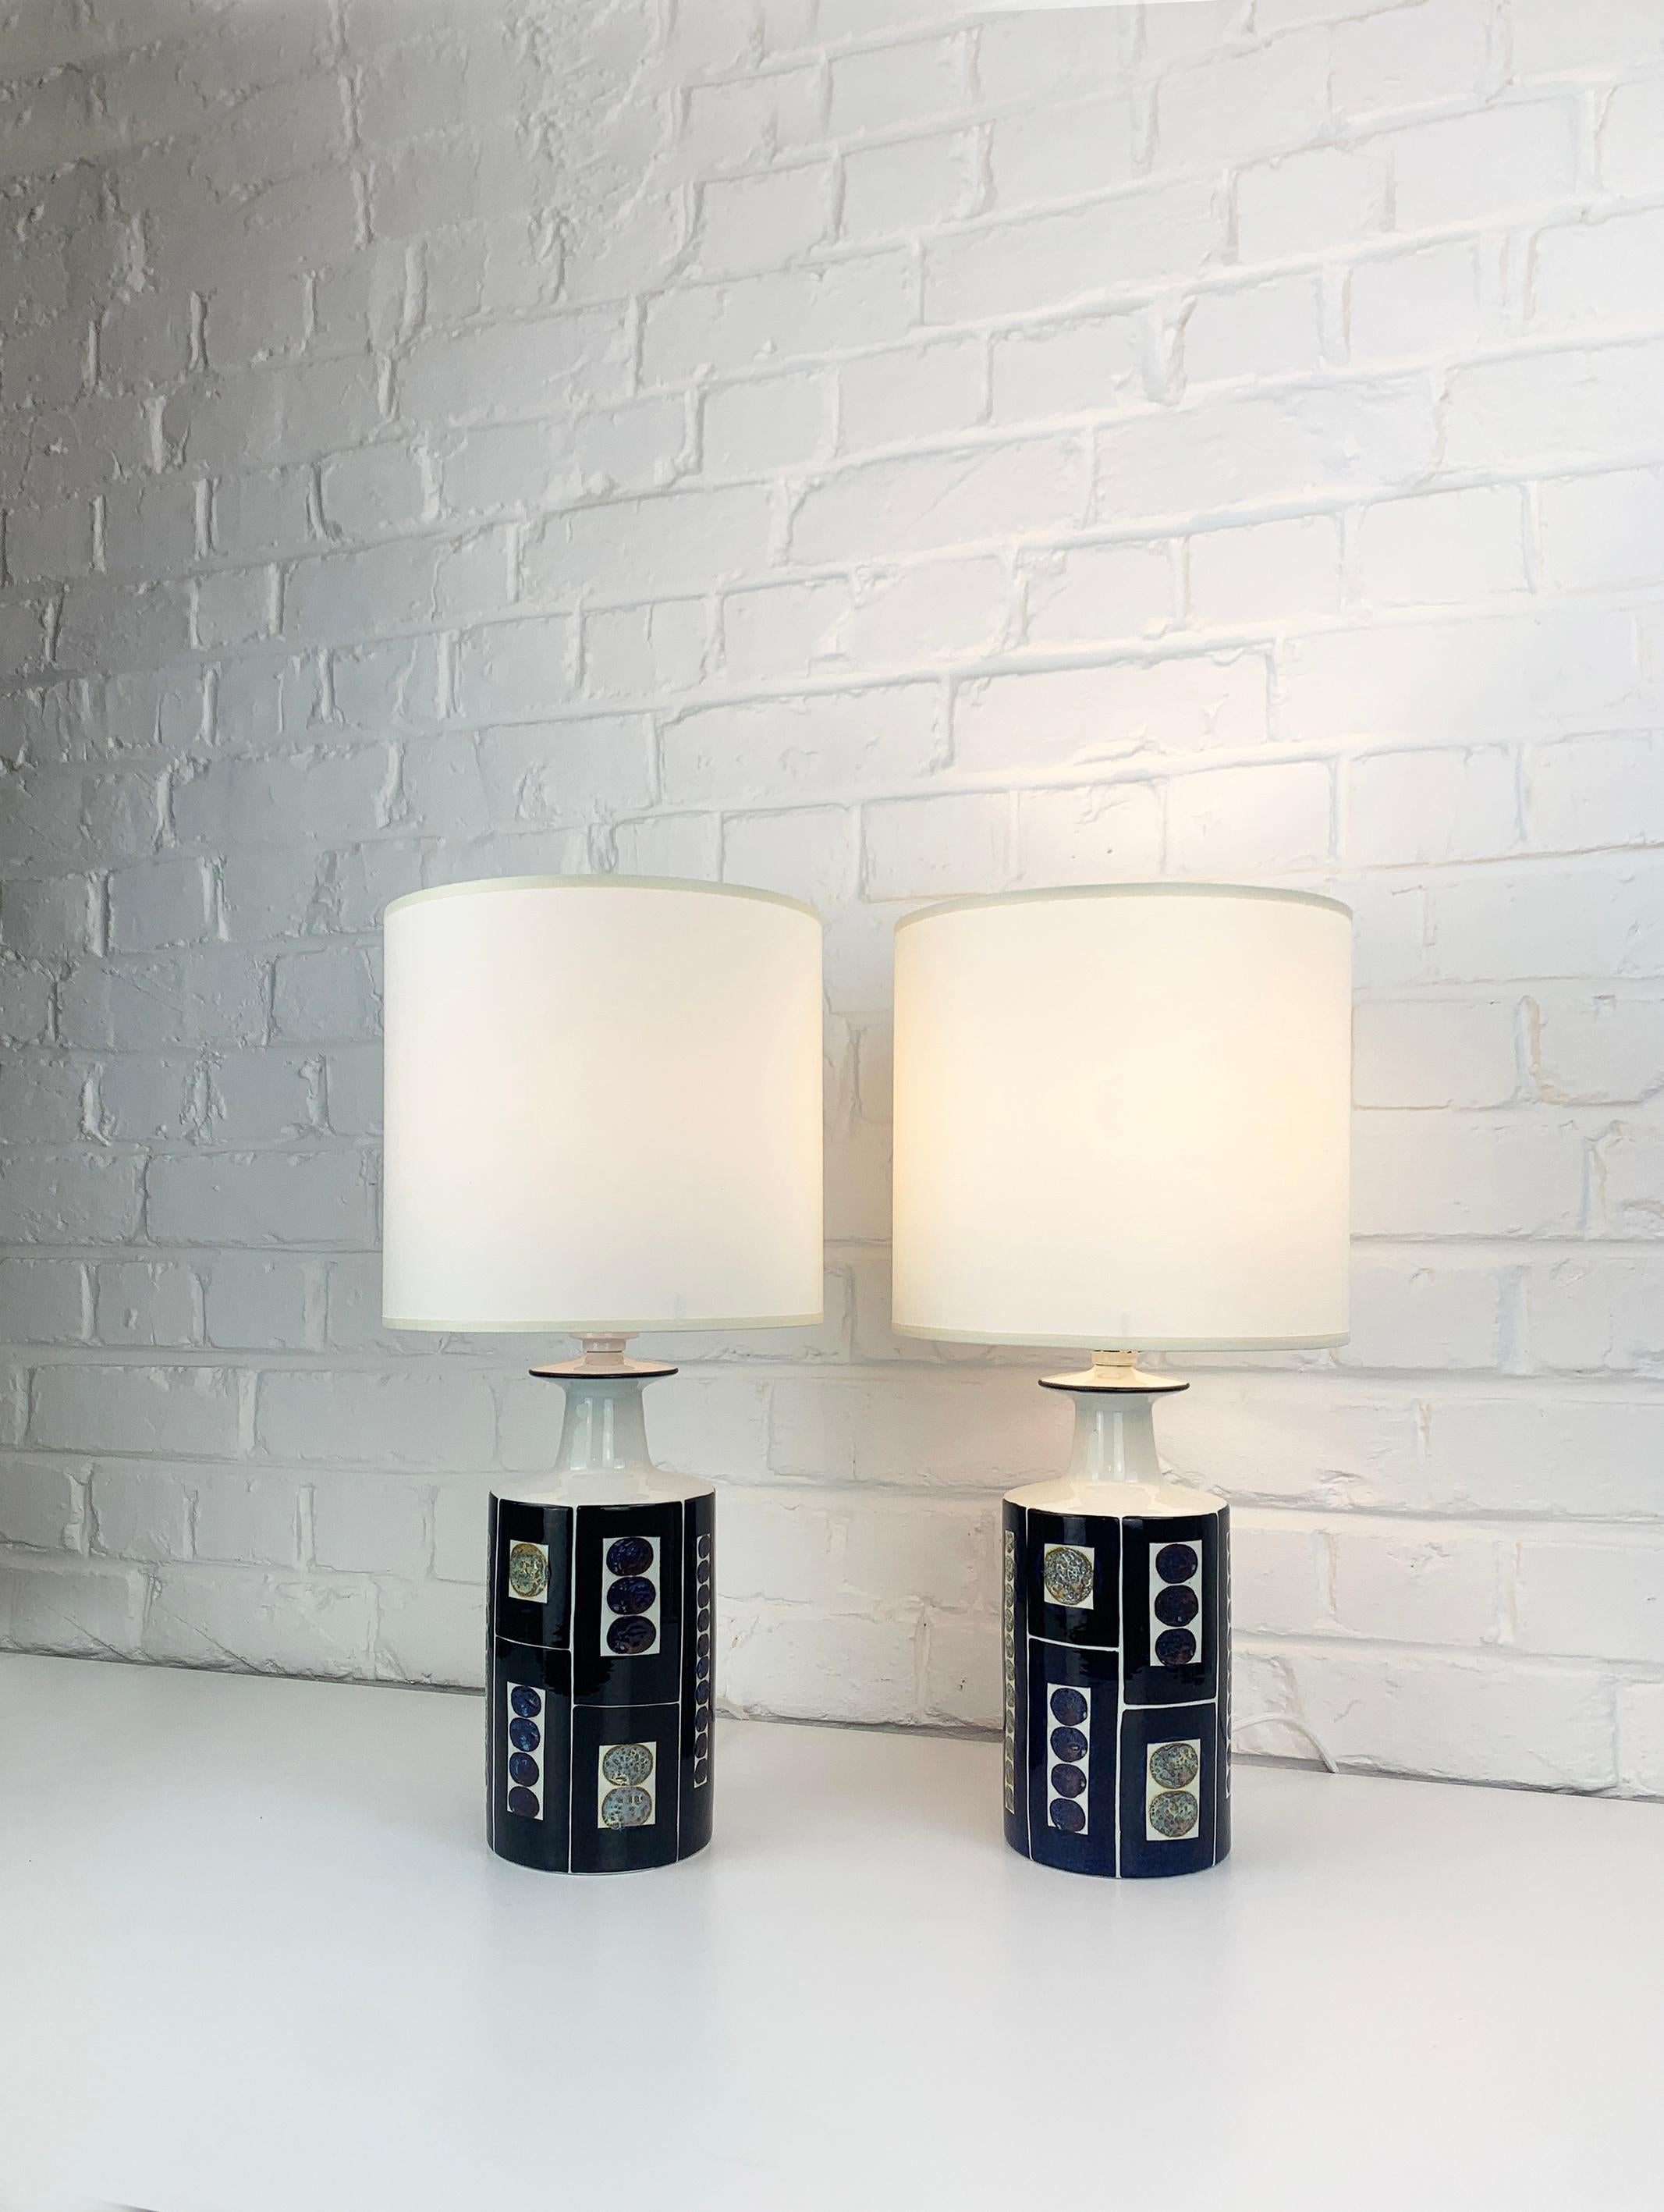 Hand-Crafted Pair Danish Modern Ceramic Lamps by I-L Koefoed Royal Copenhagen Fog&Morup 1960s For Sale